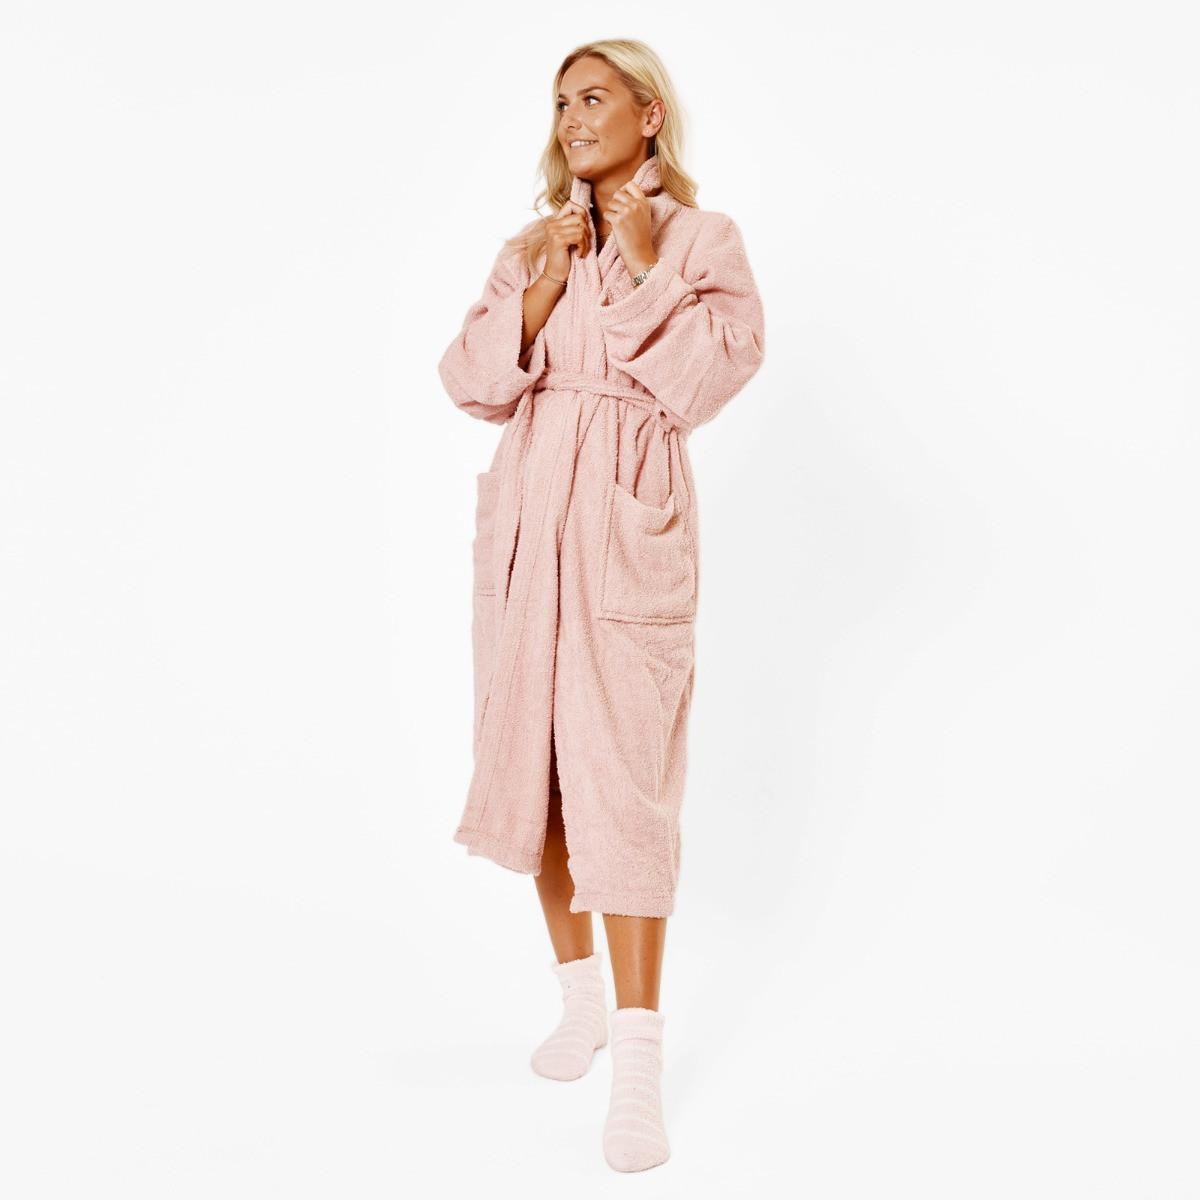 Brentfords 100% Cotton Towelling Dressing Gown, Adults - Blush Pink>